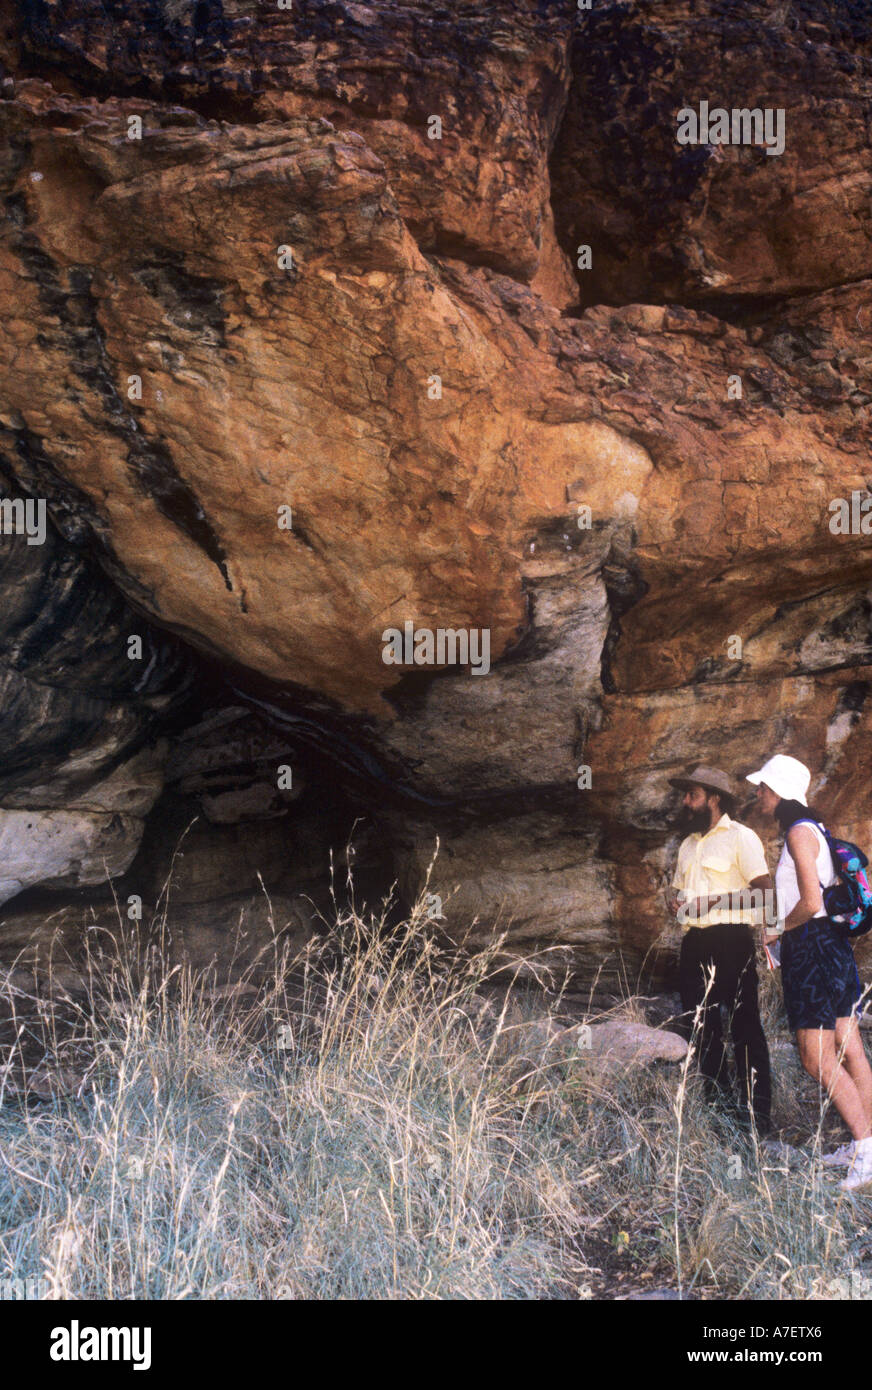 Aboriginal cave paintings near KIngs Canyon in central Australia Stock Photo